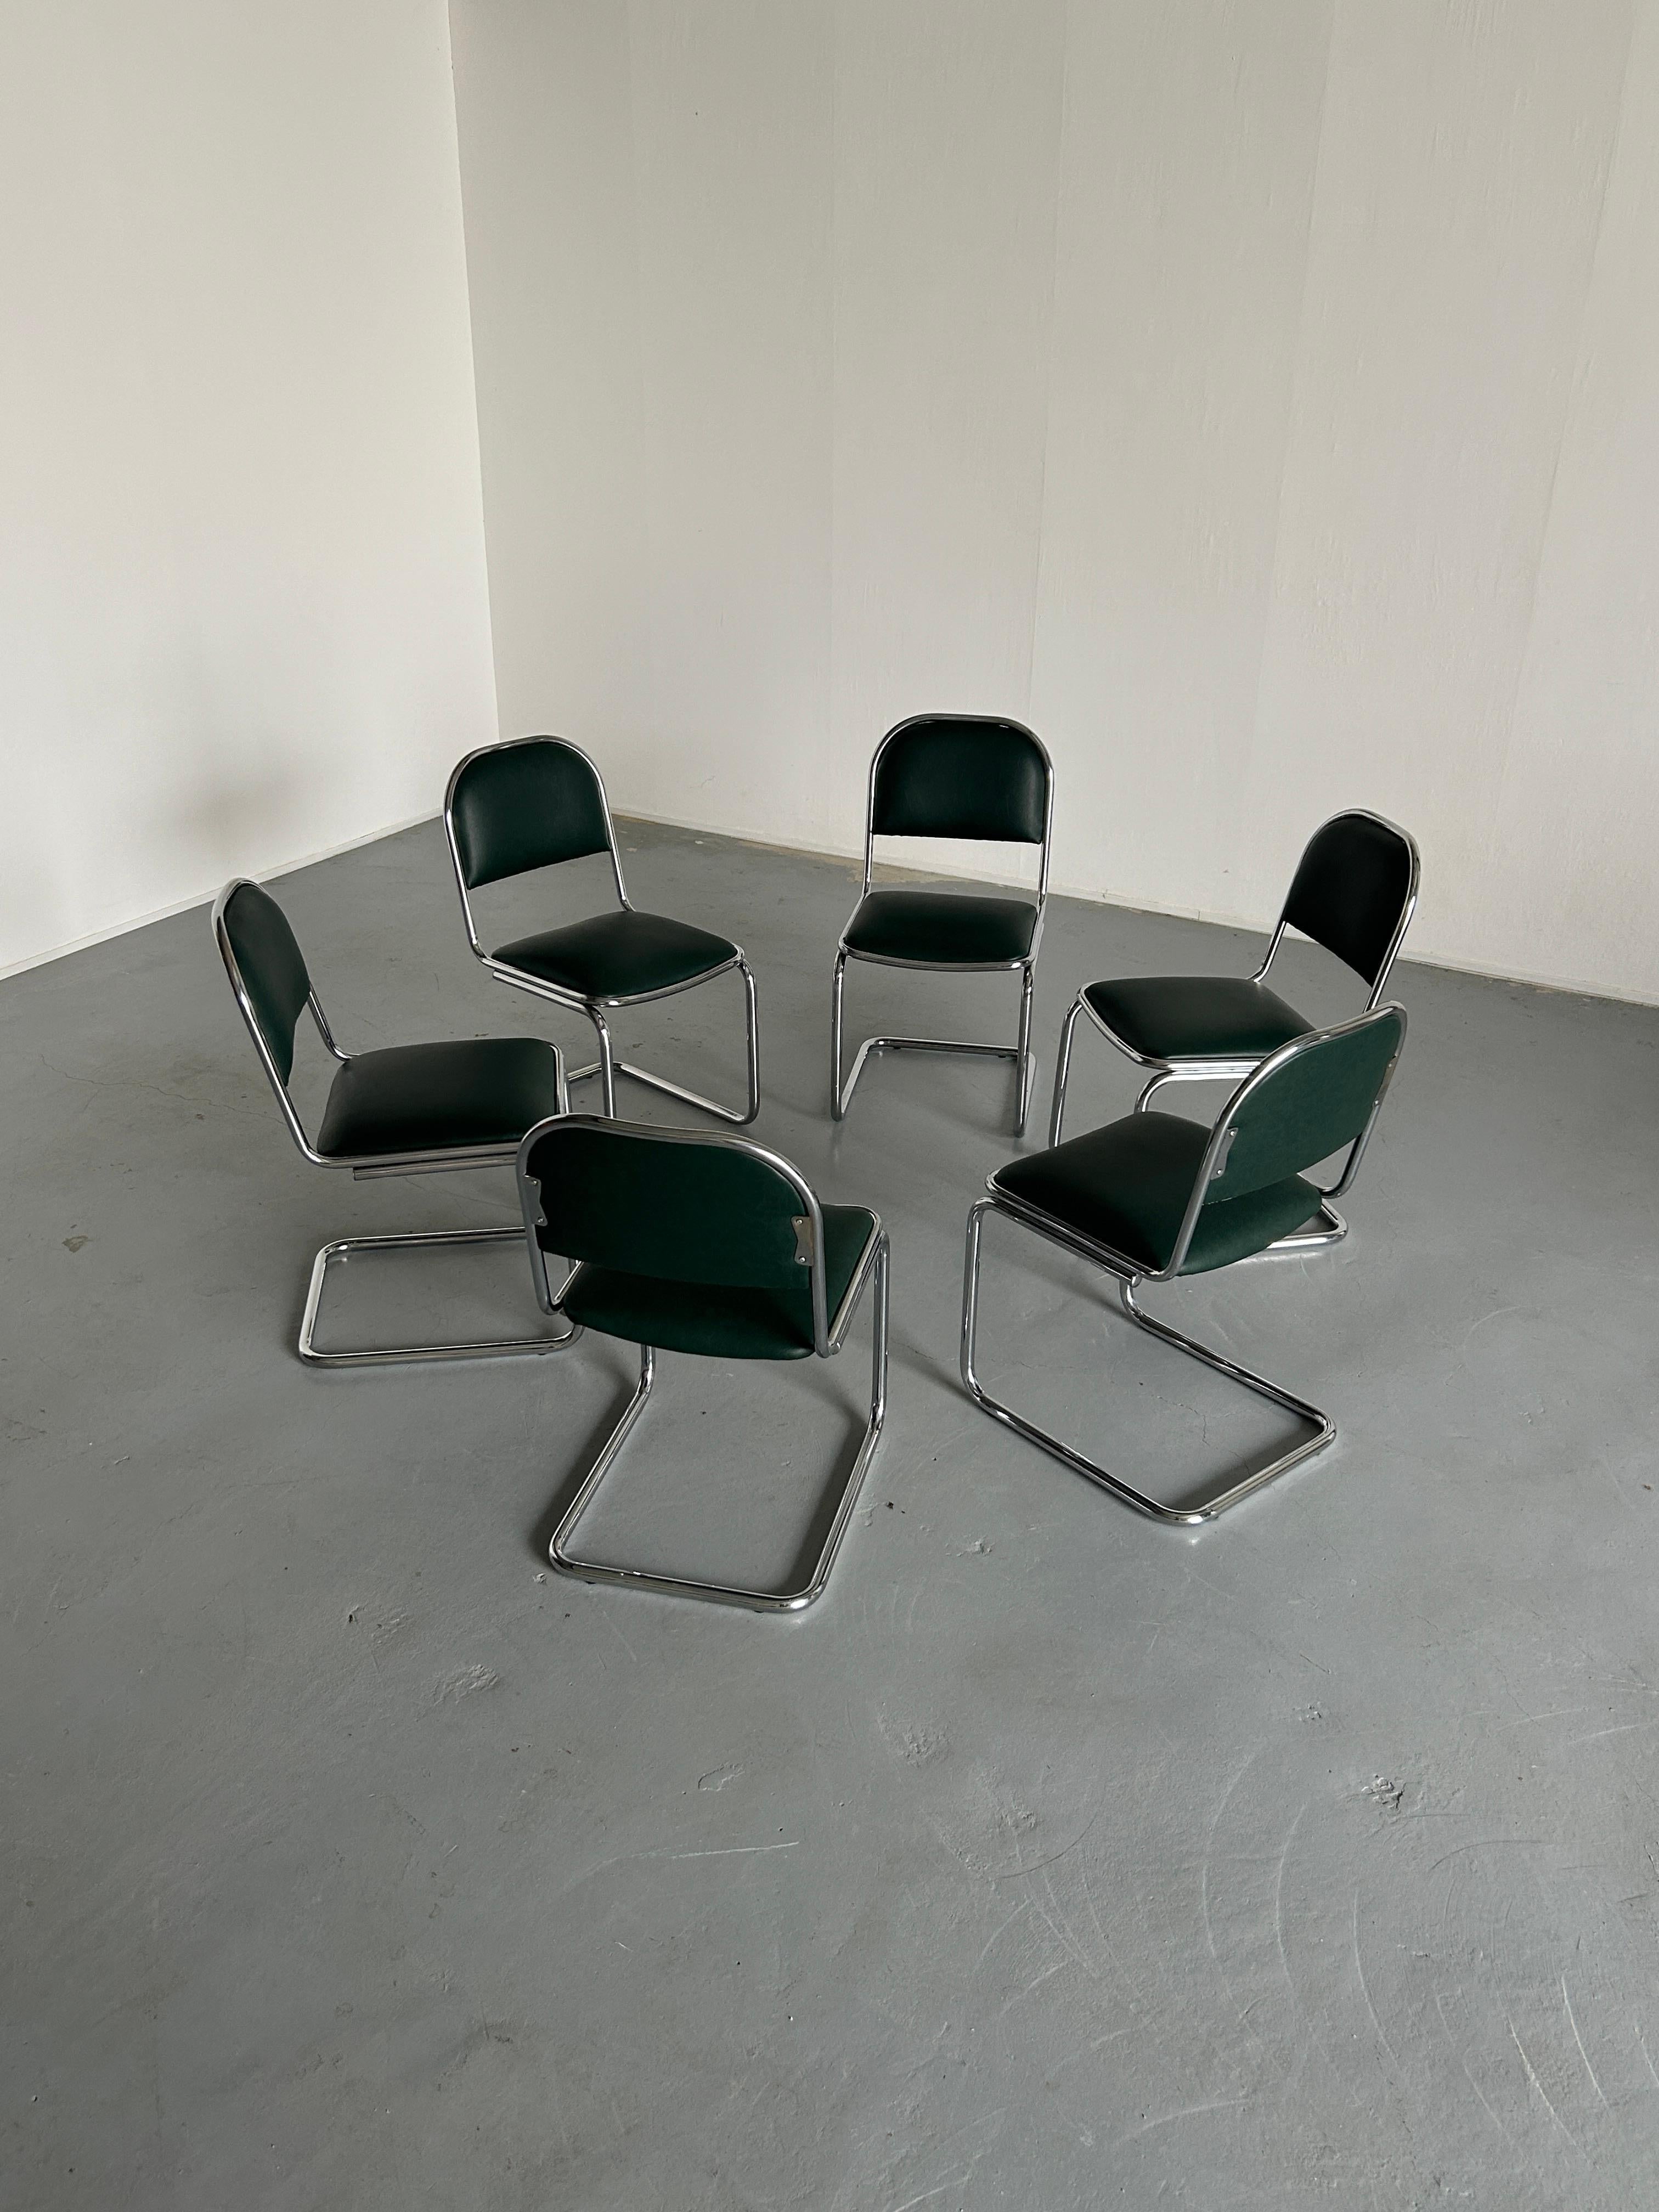 Late 20th Century  1 of 6 Bauhaus Design Chrome Tubular Steel and Green Faux Leather Chairs, 1980s For Sale